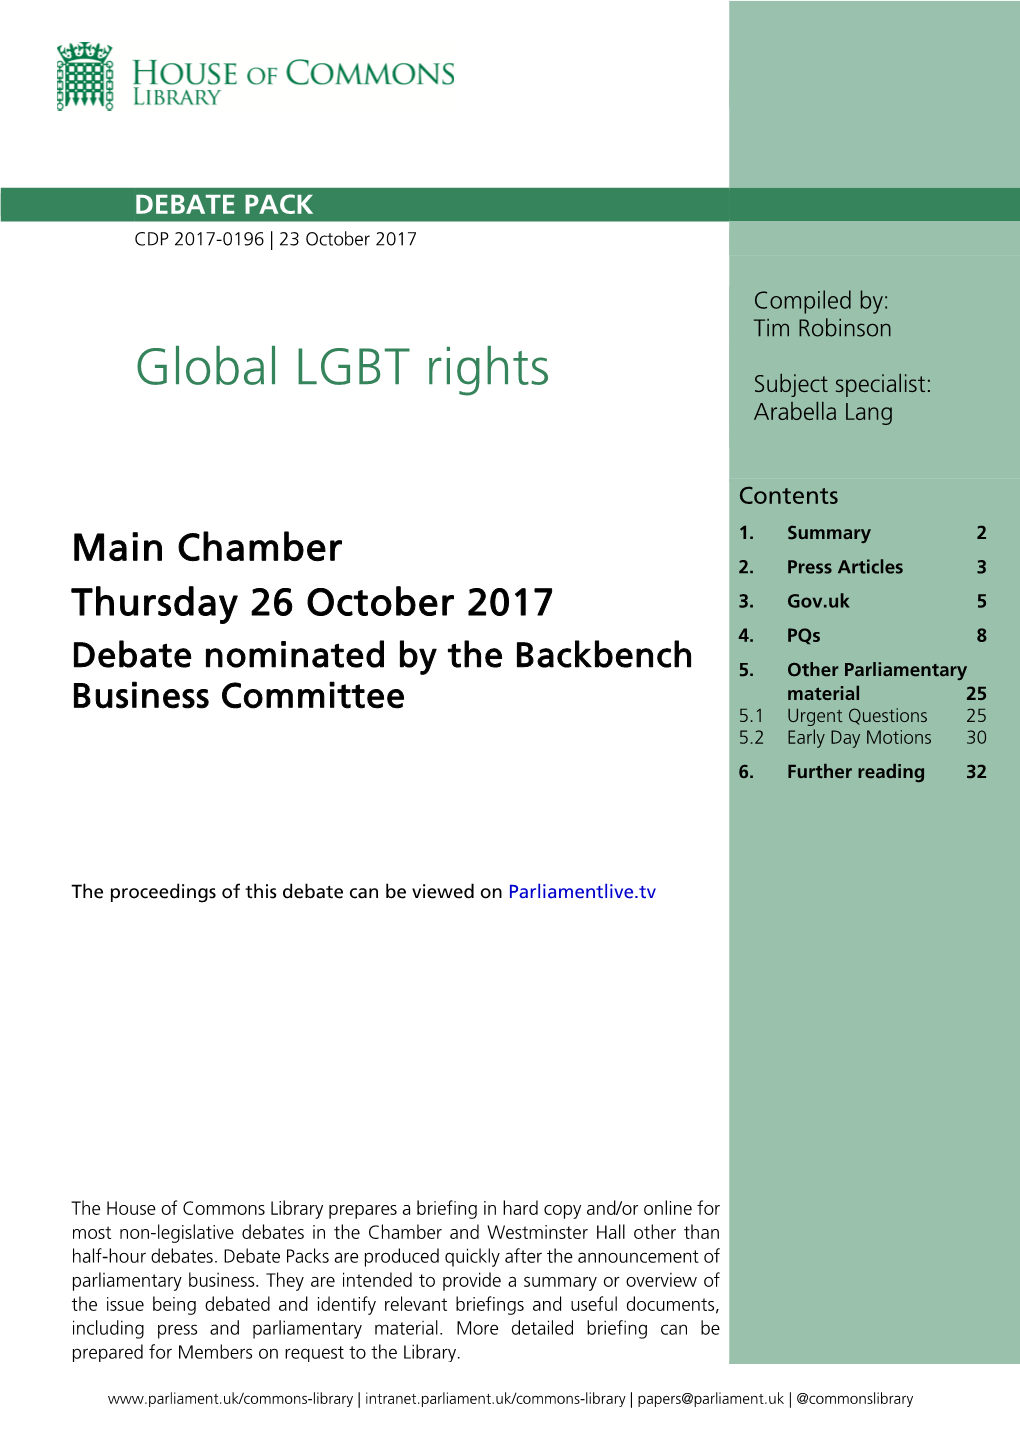 Global LGBT Rights Subject Specialist: Arabella Lang